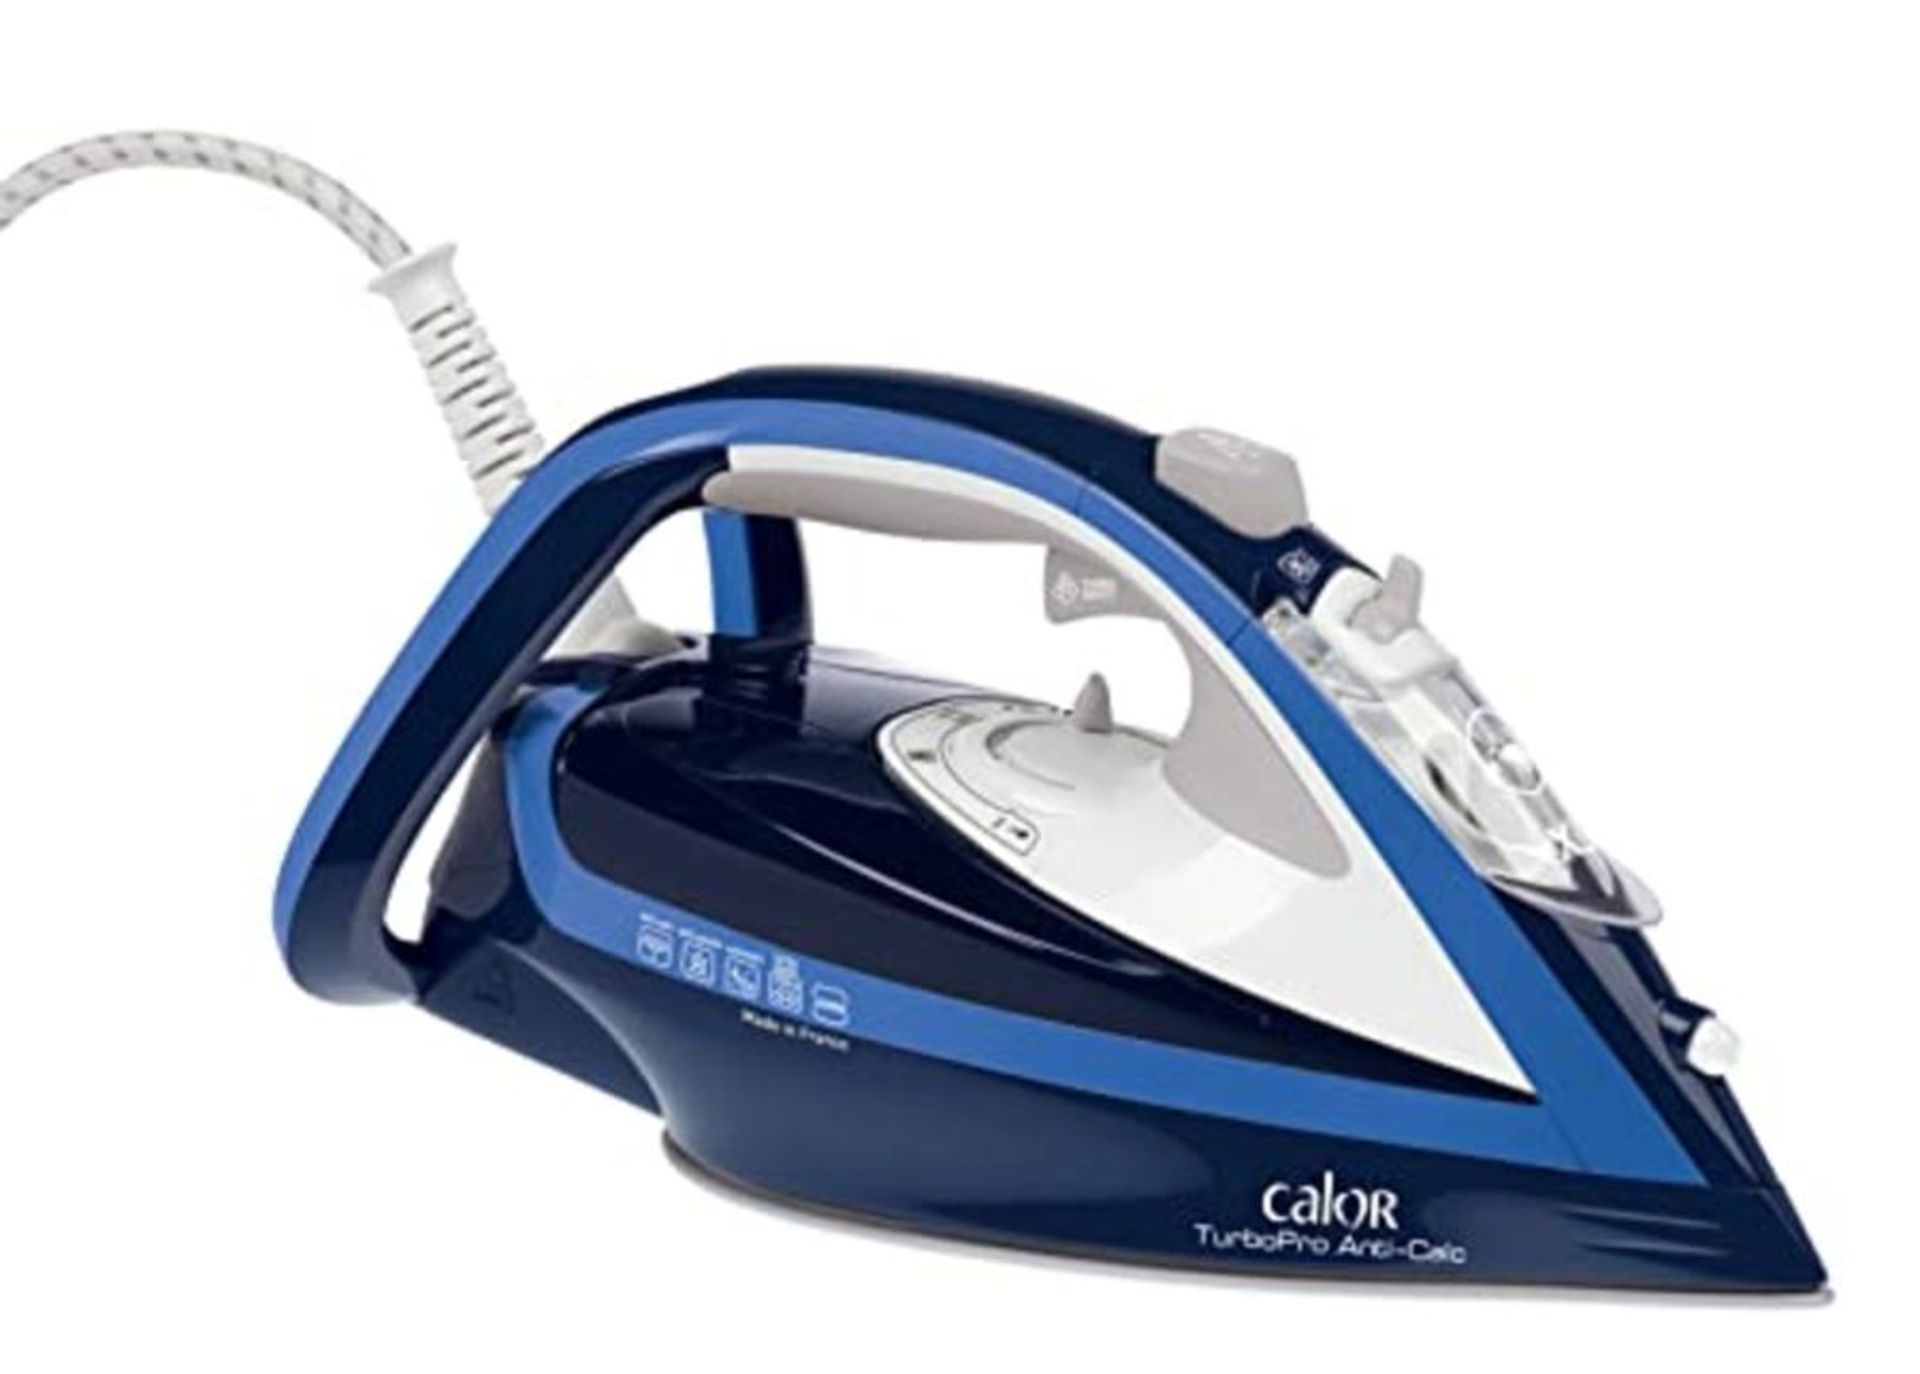 RRP £62.00 [CRACKED] Calor Turbo Steam Iron Anti-Calc 2600 W Function Turbo Boost 200 g/min with